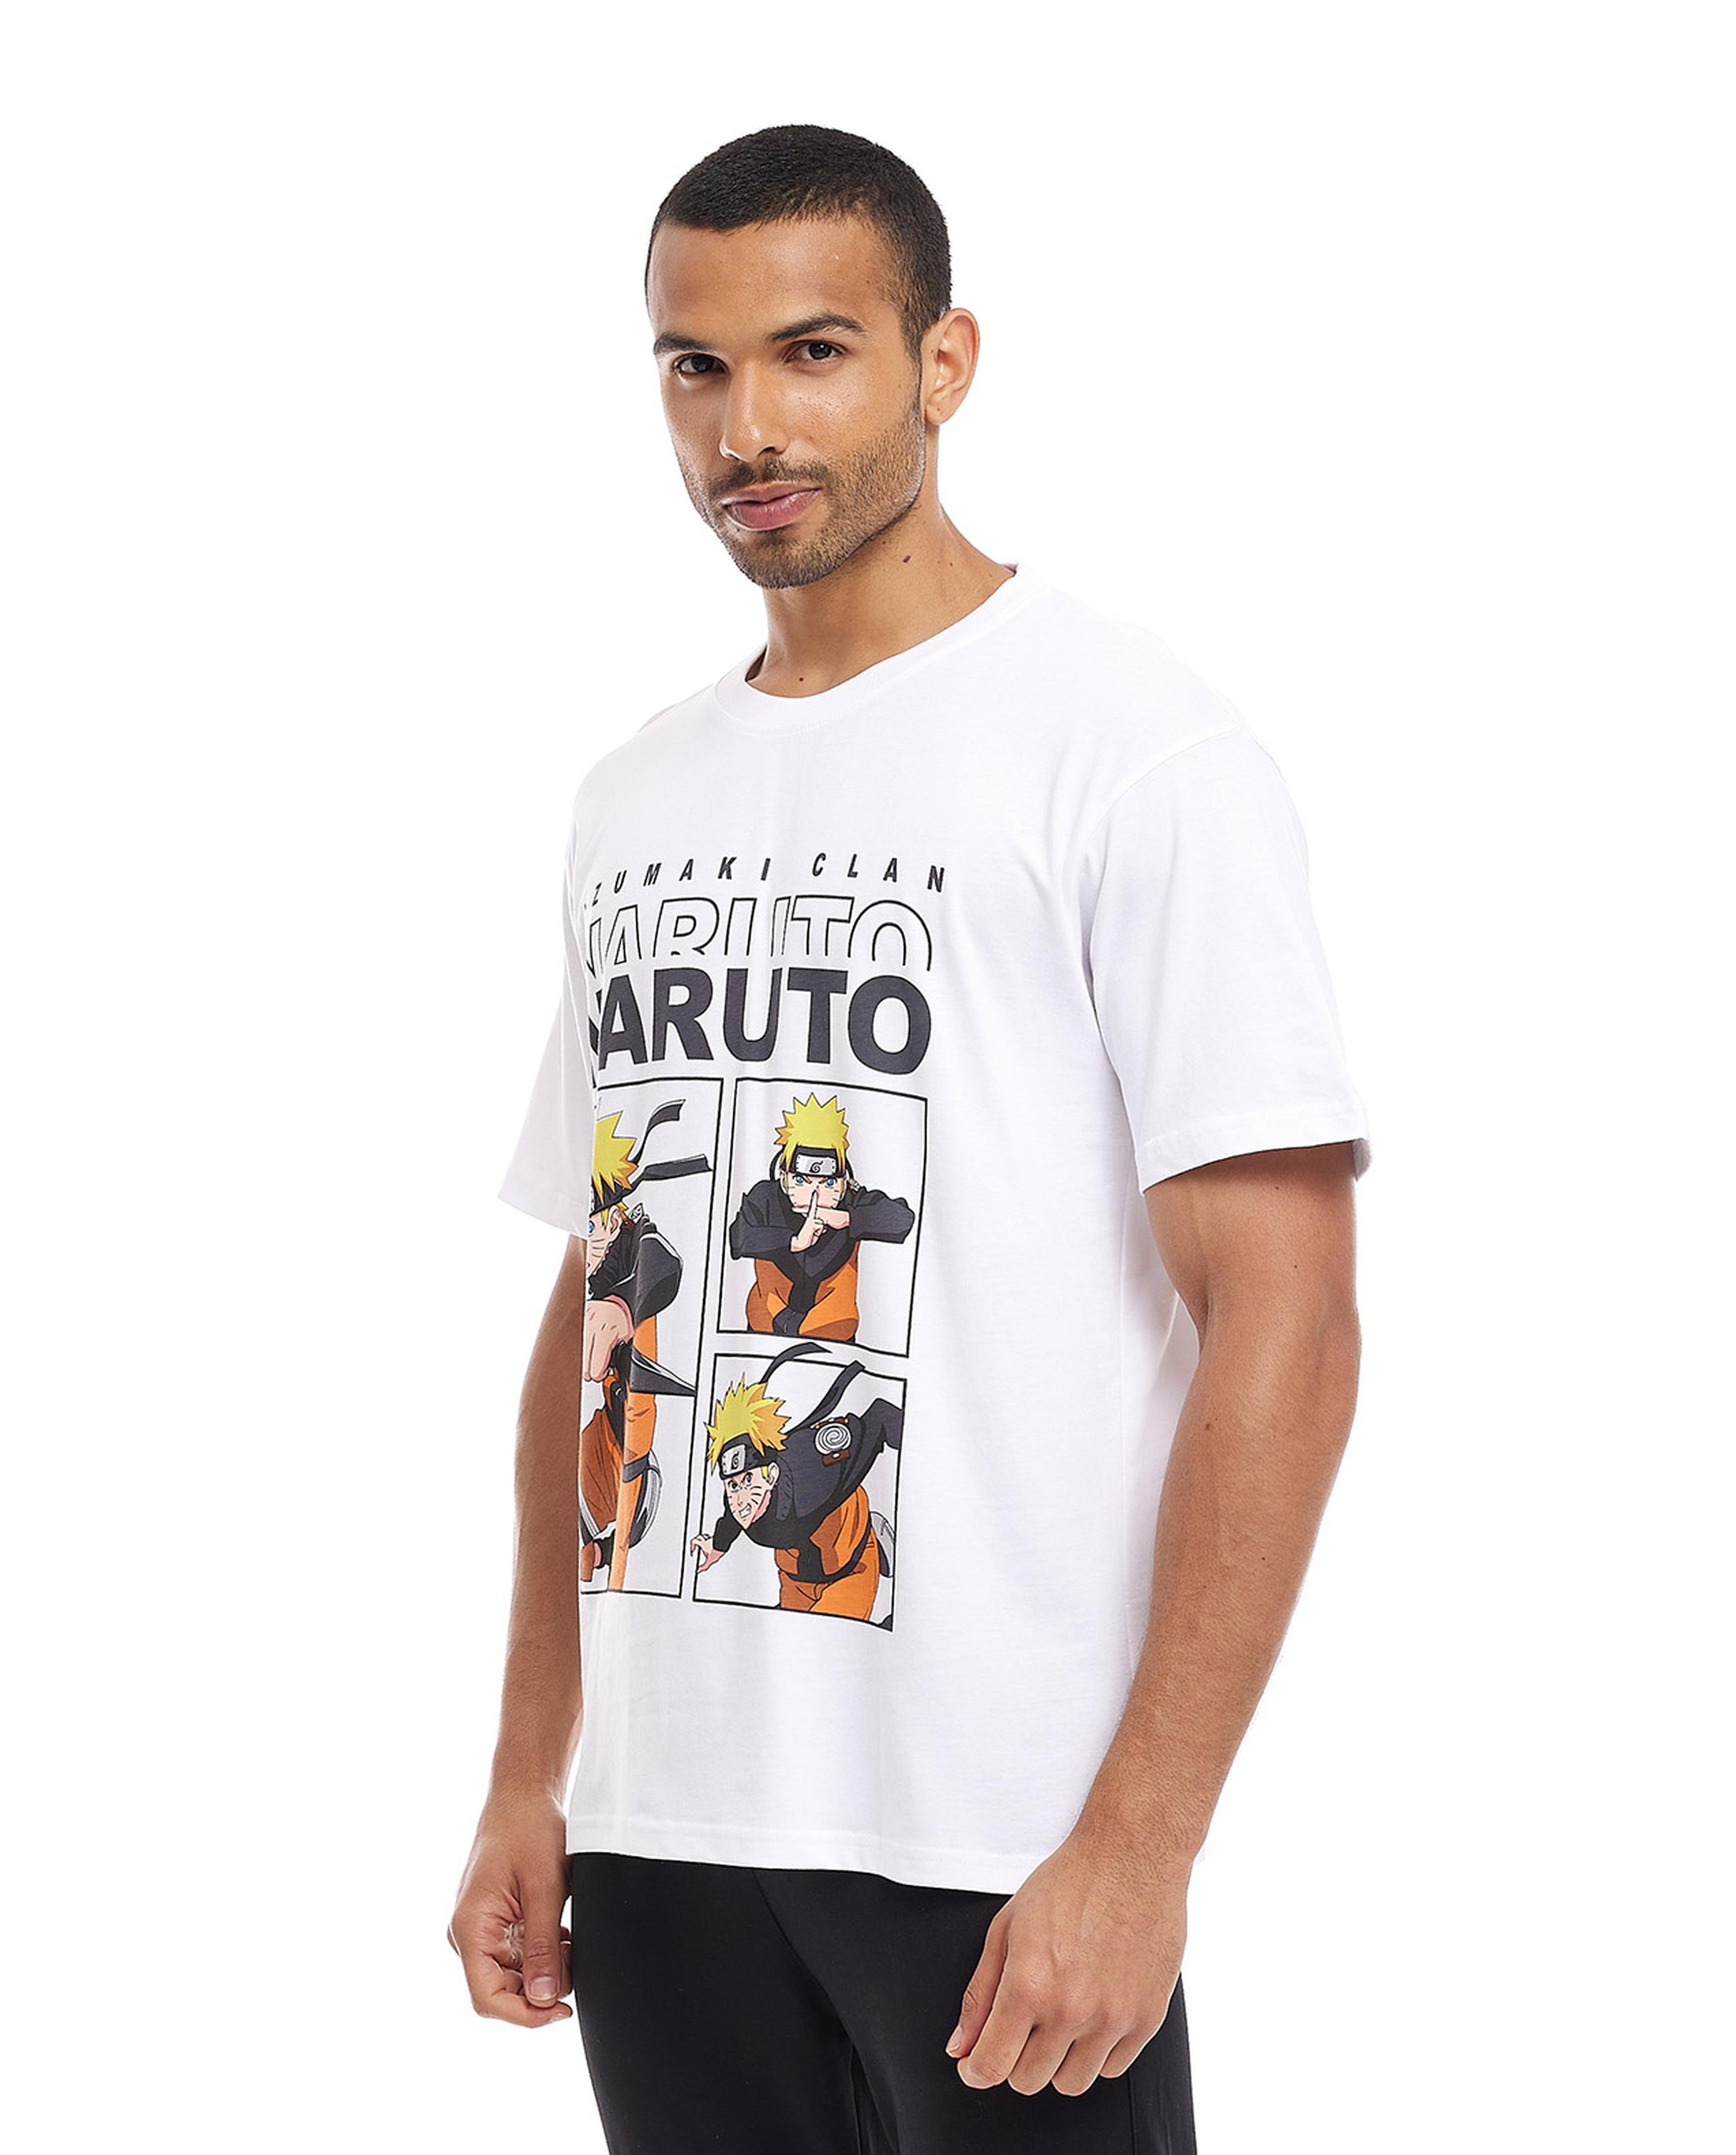 Naruto Print T-Shirt with Crew Neck and Short Sleeves